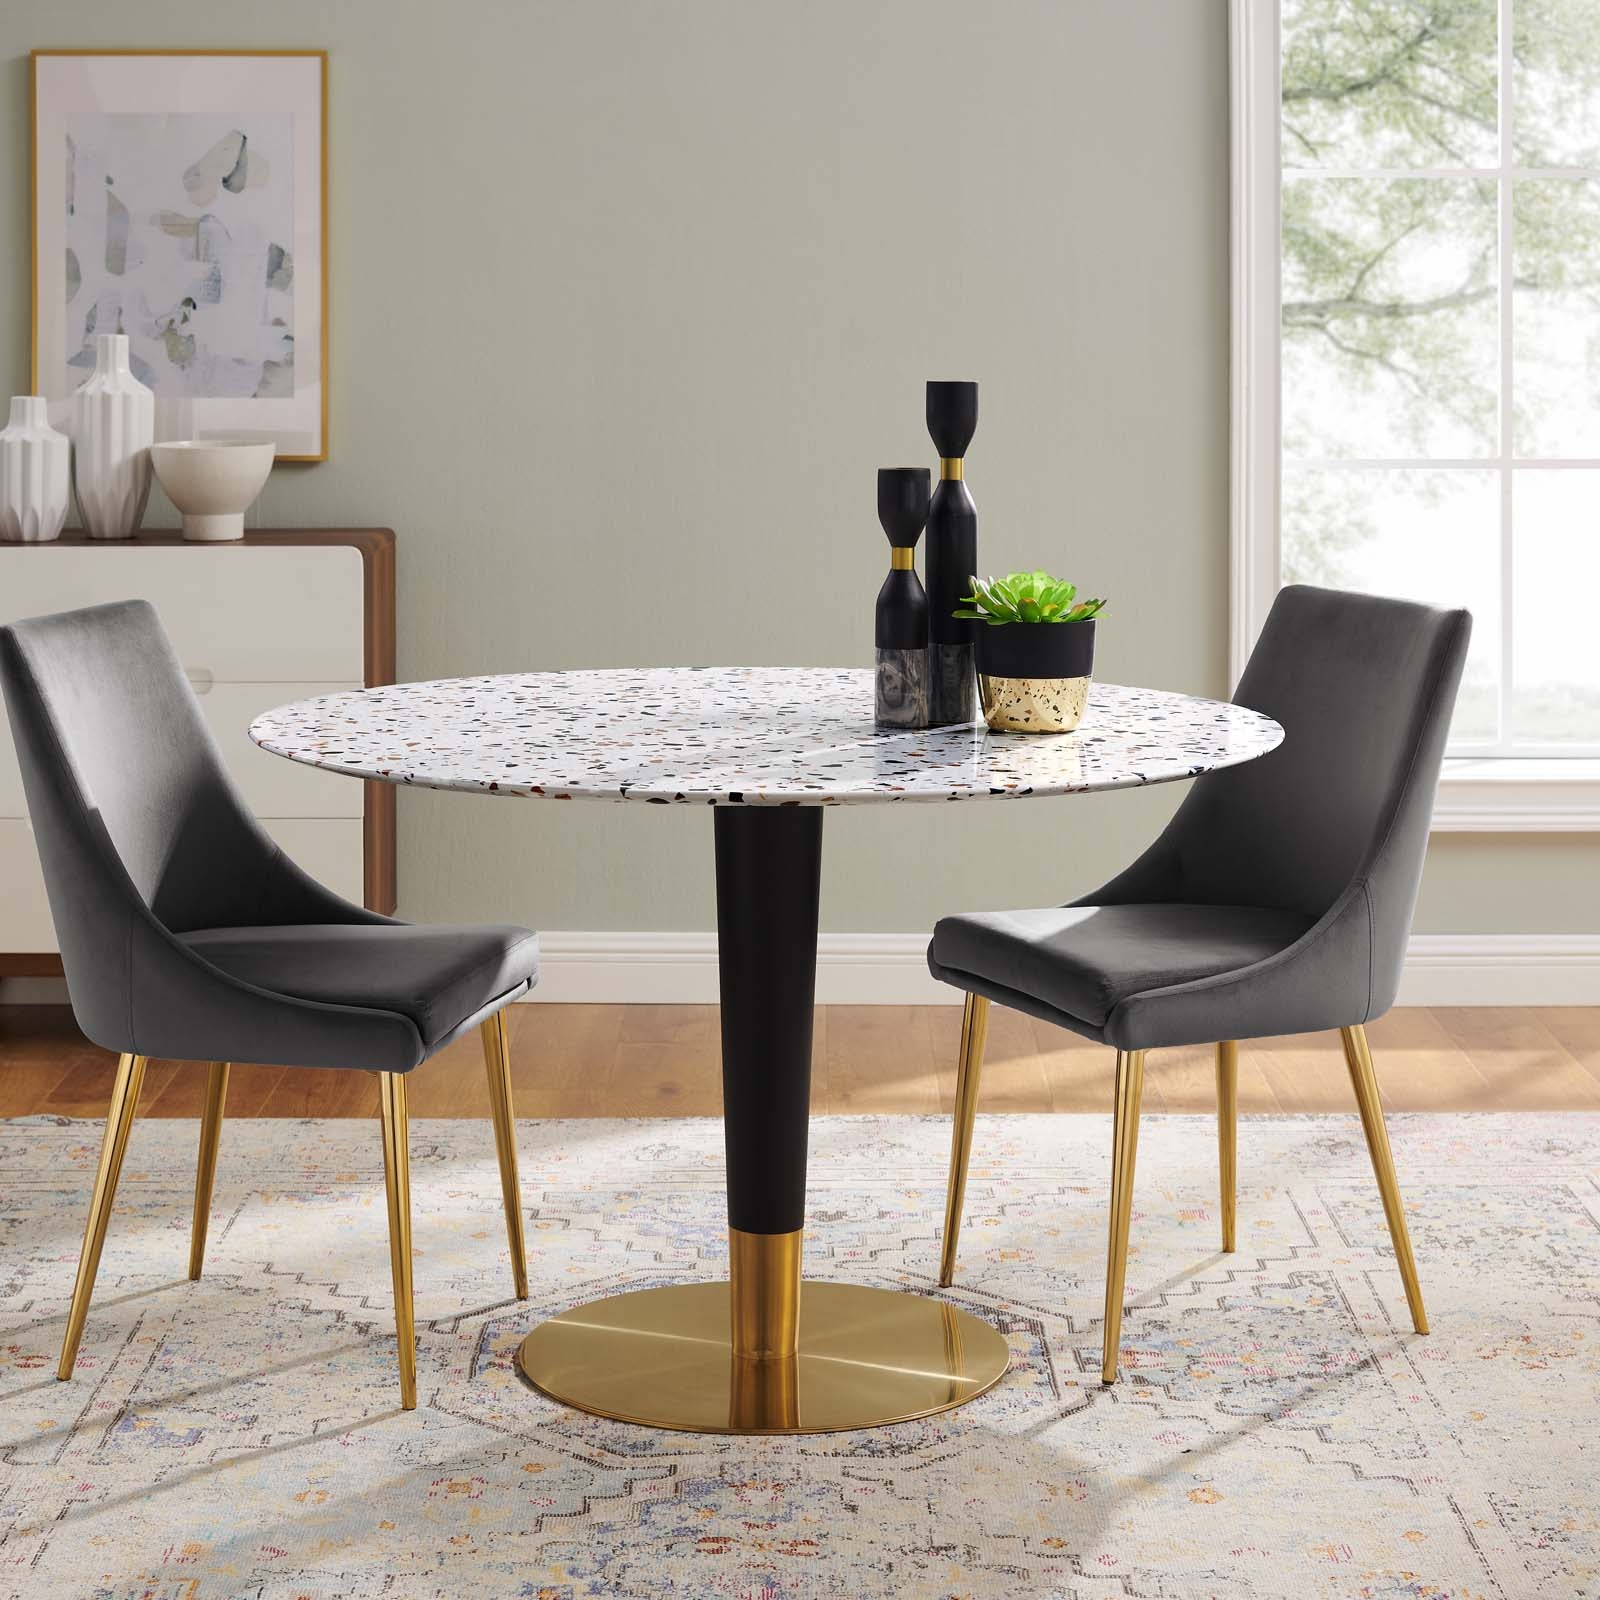 Zinque 47" Round Terrazzo Dining Table-Dining Table-Modway-Wall2Wall Furnishings